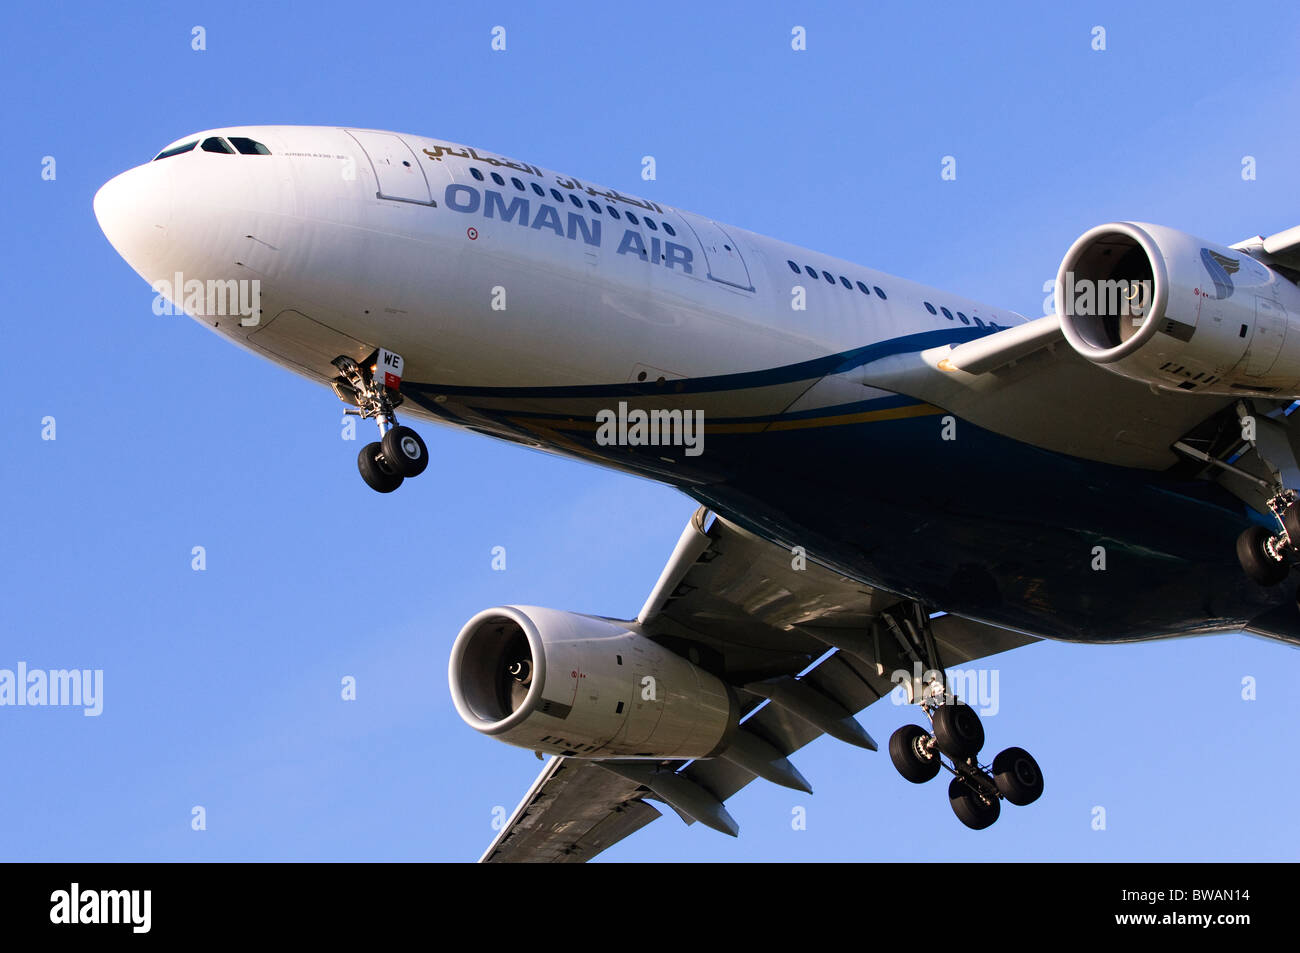 Airbus A330-200 operated by Oman Air on approach for landing at London Heathrow Airport Stock Photo